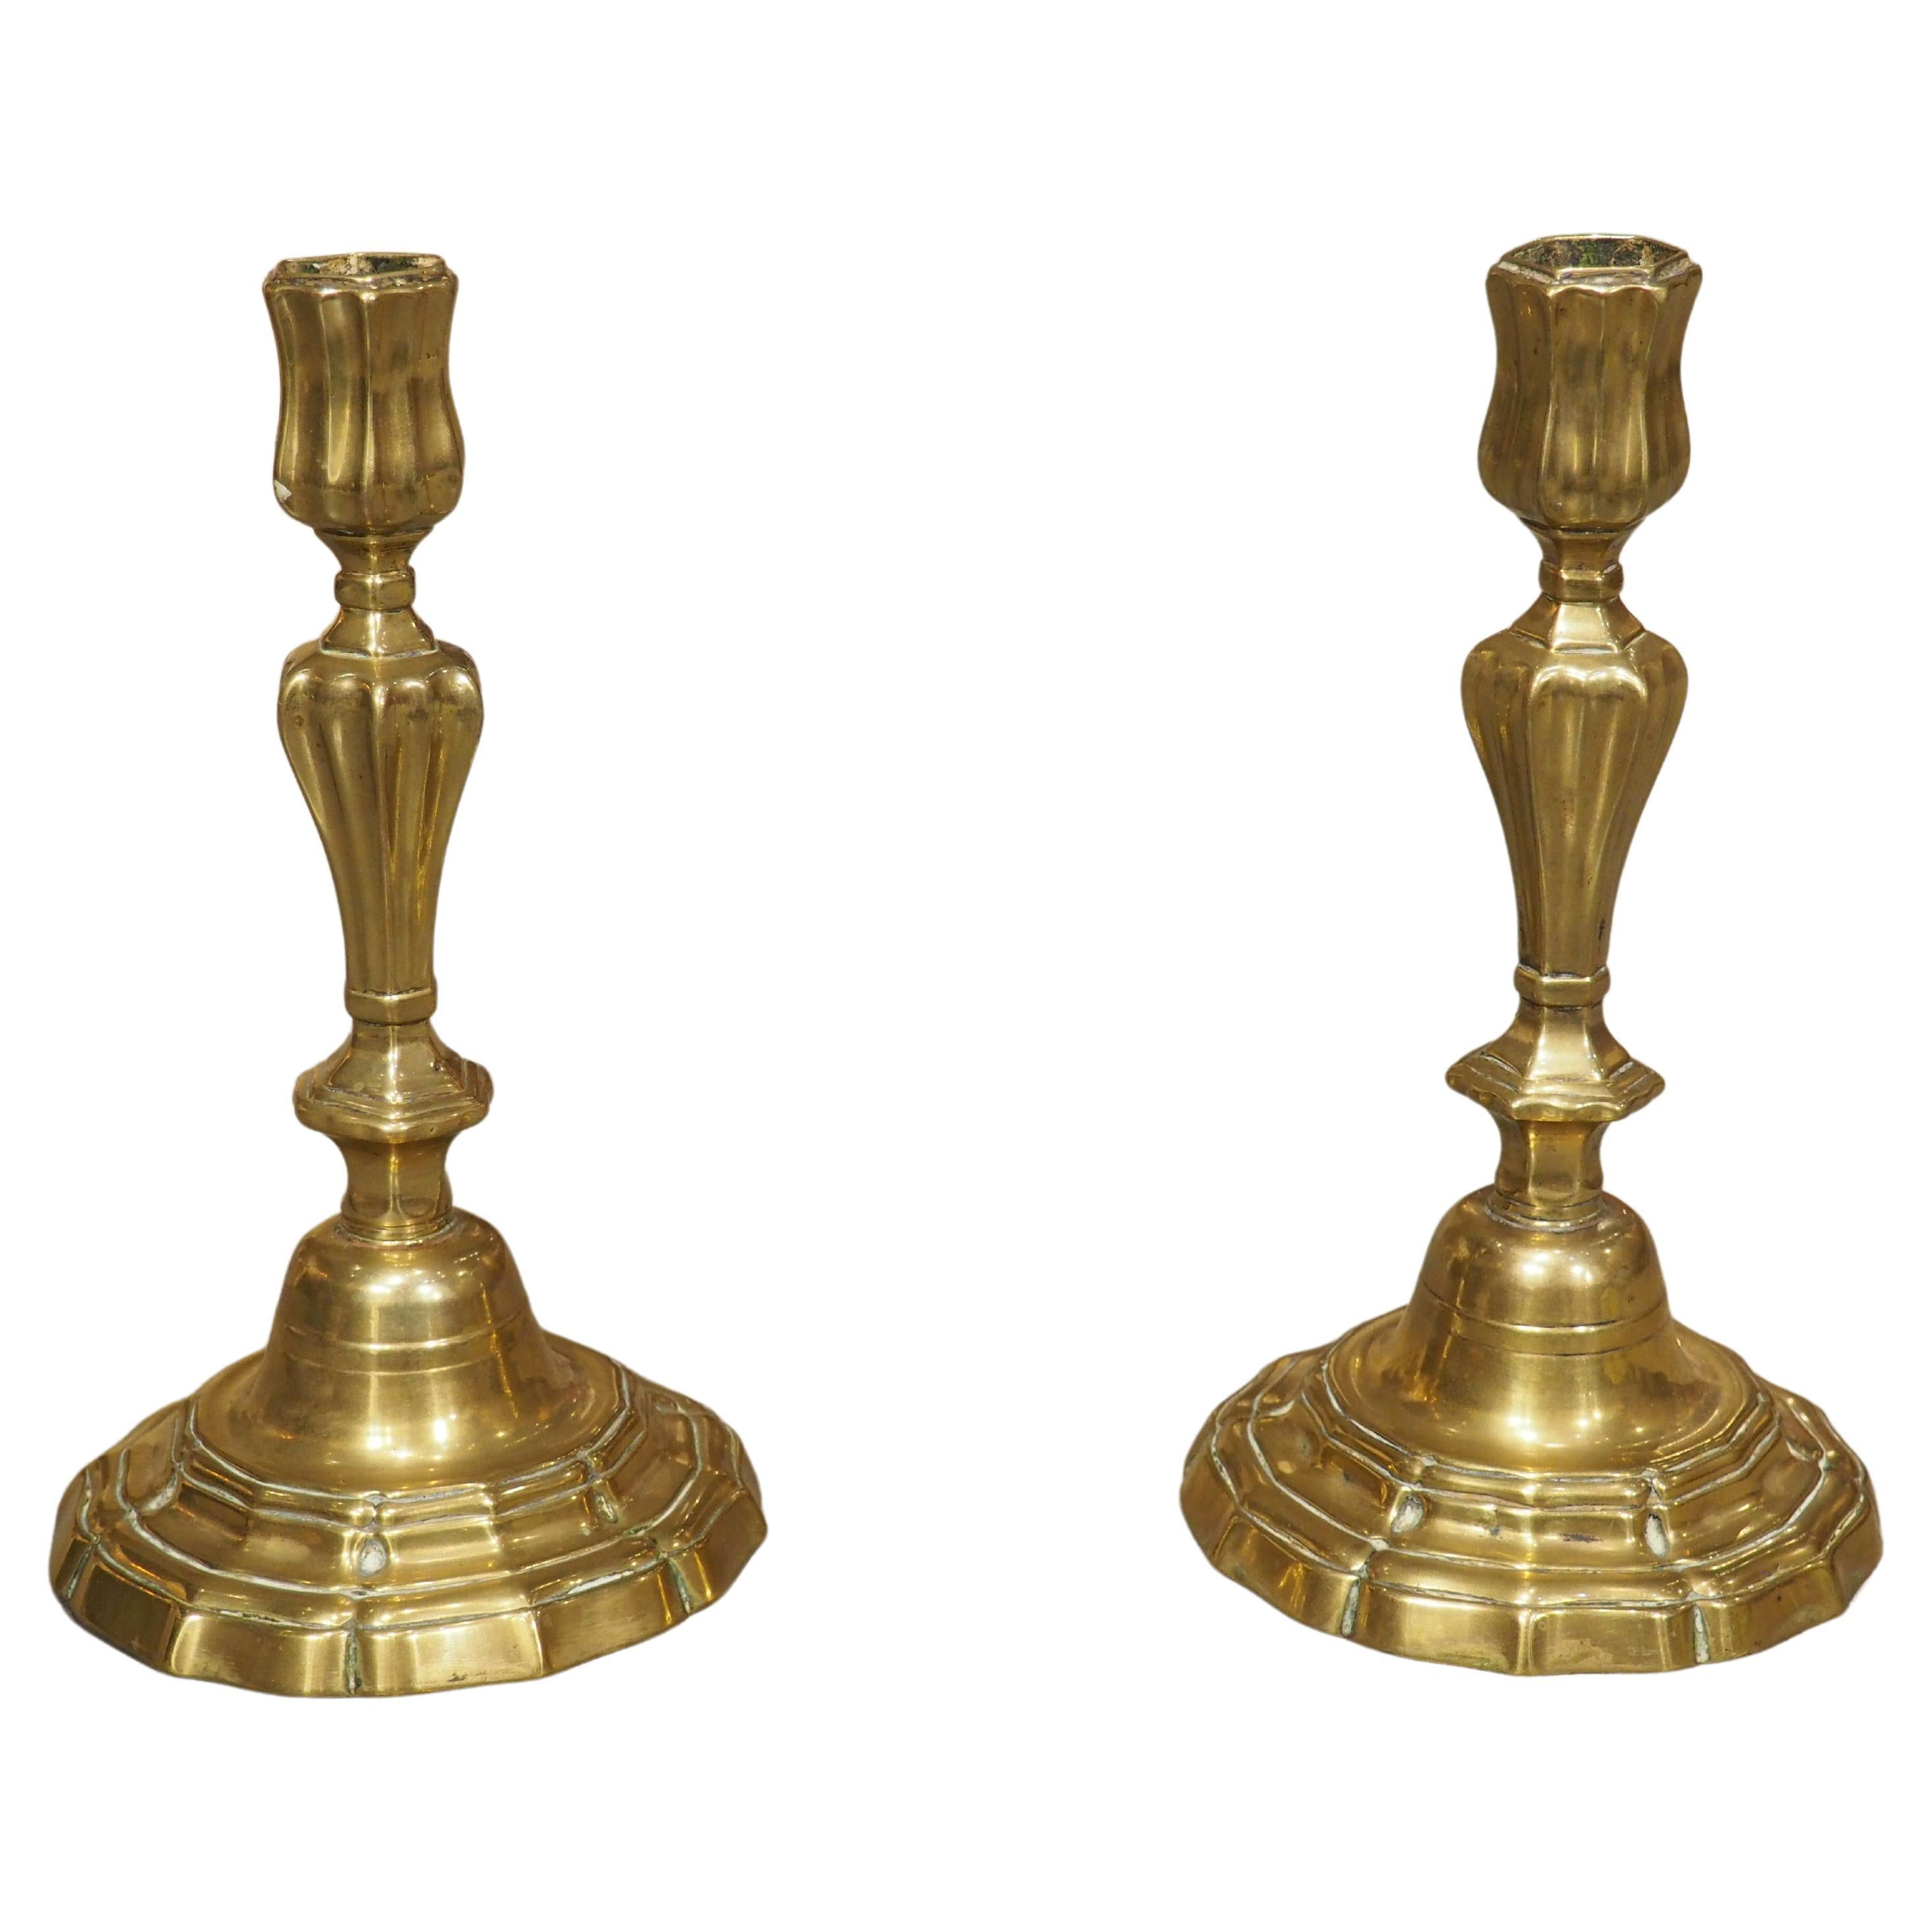 Pair of 18th Century French Gilt Bronze Candlesticks